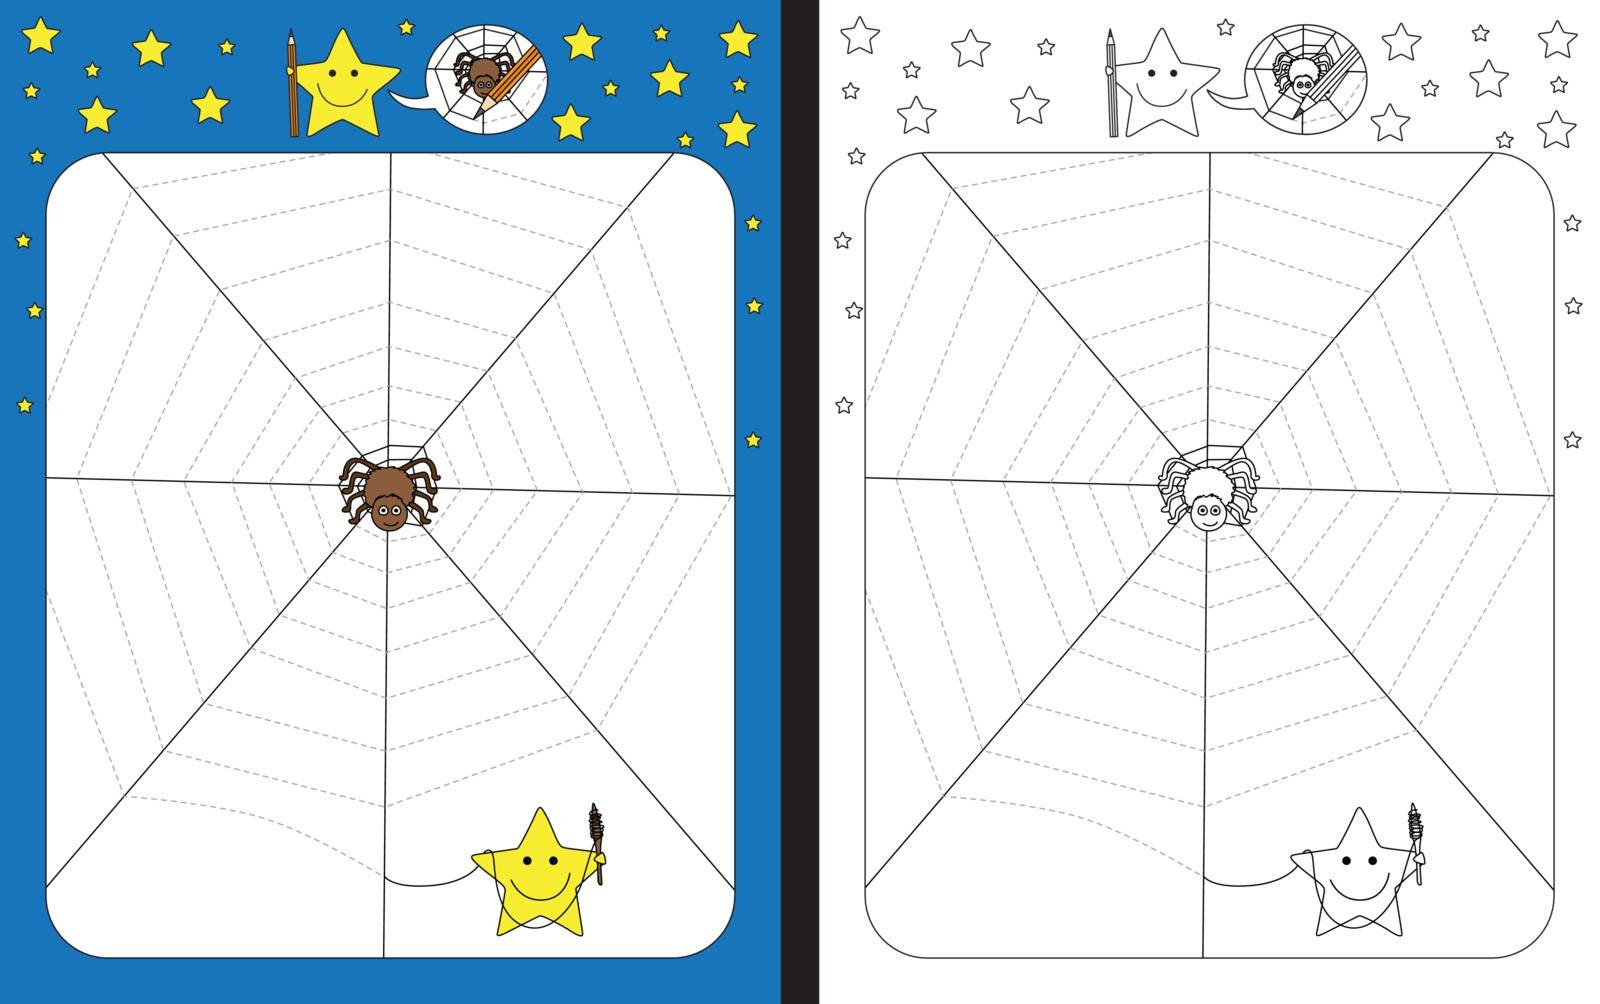 Preschool worksheet for practicing fine motor skills - tracing dashed lines - finish the spider web